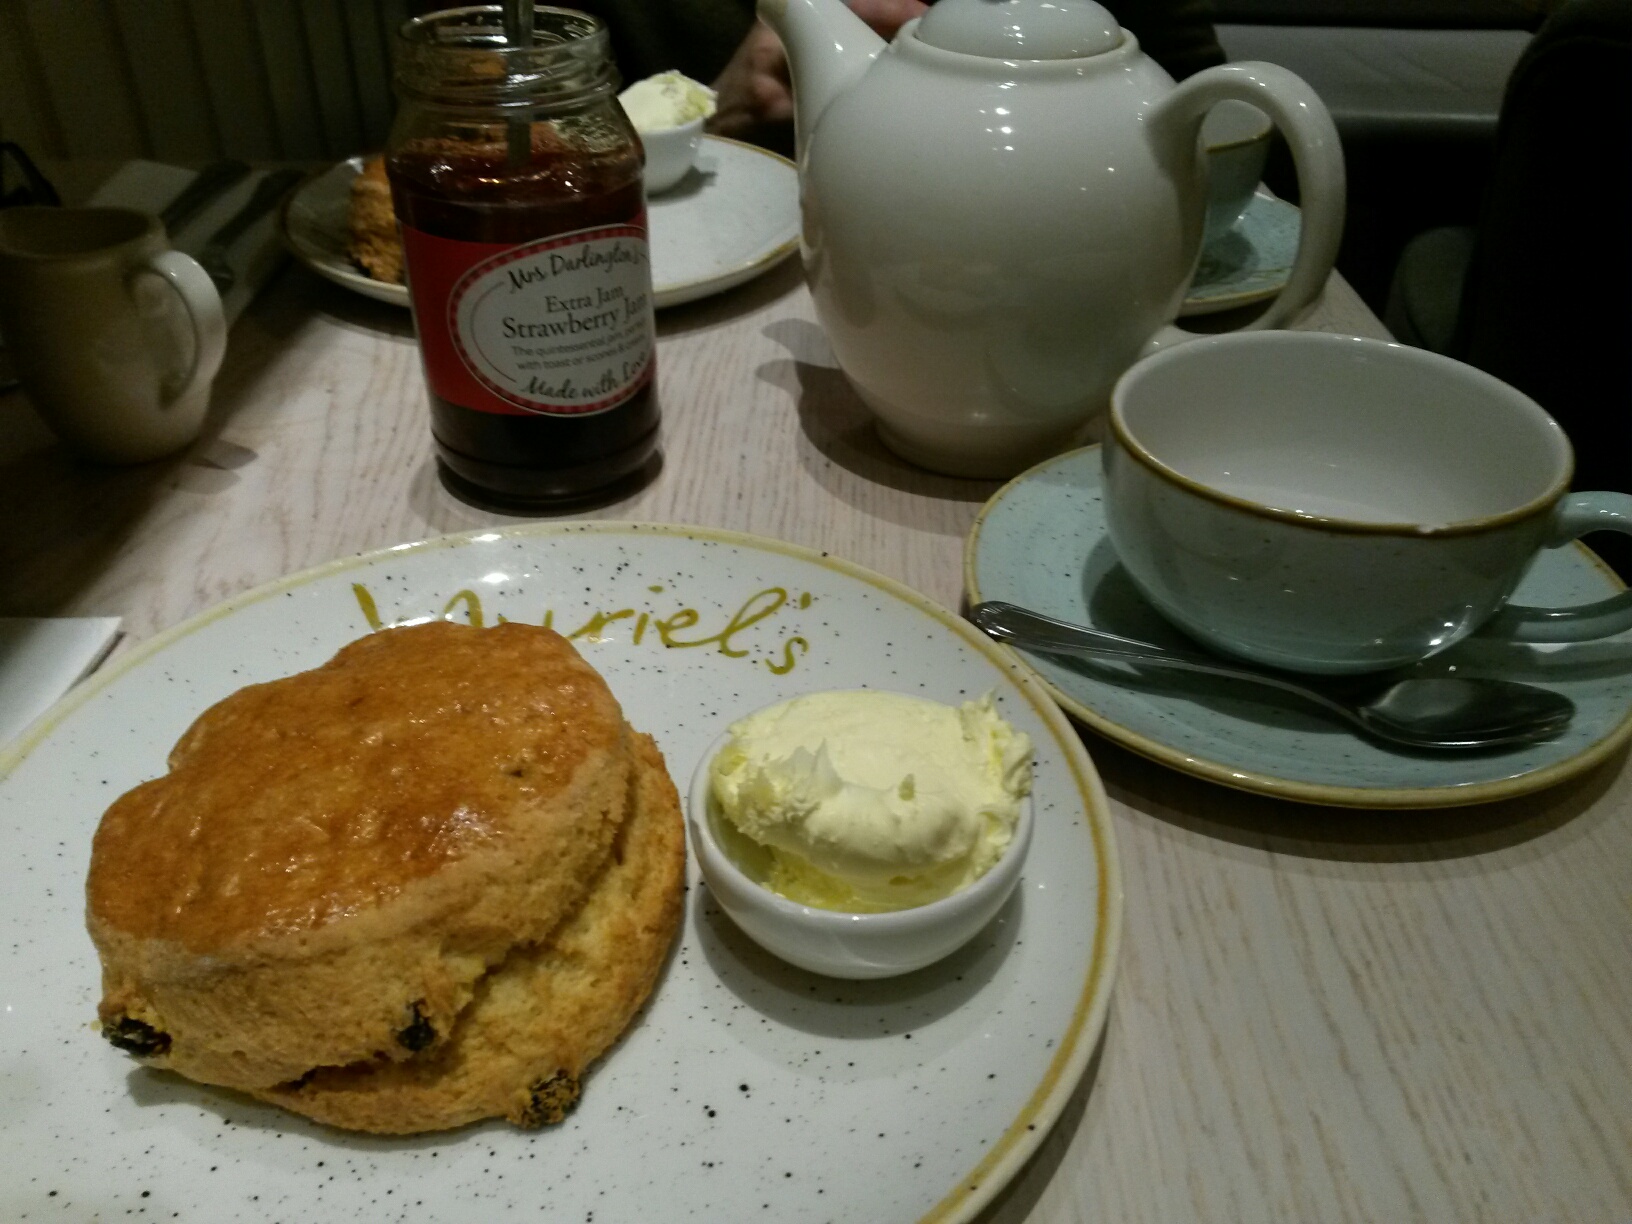 Fancy a scone with clotted cream...?